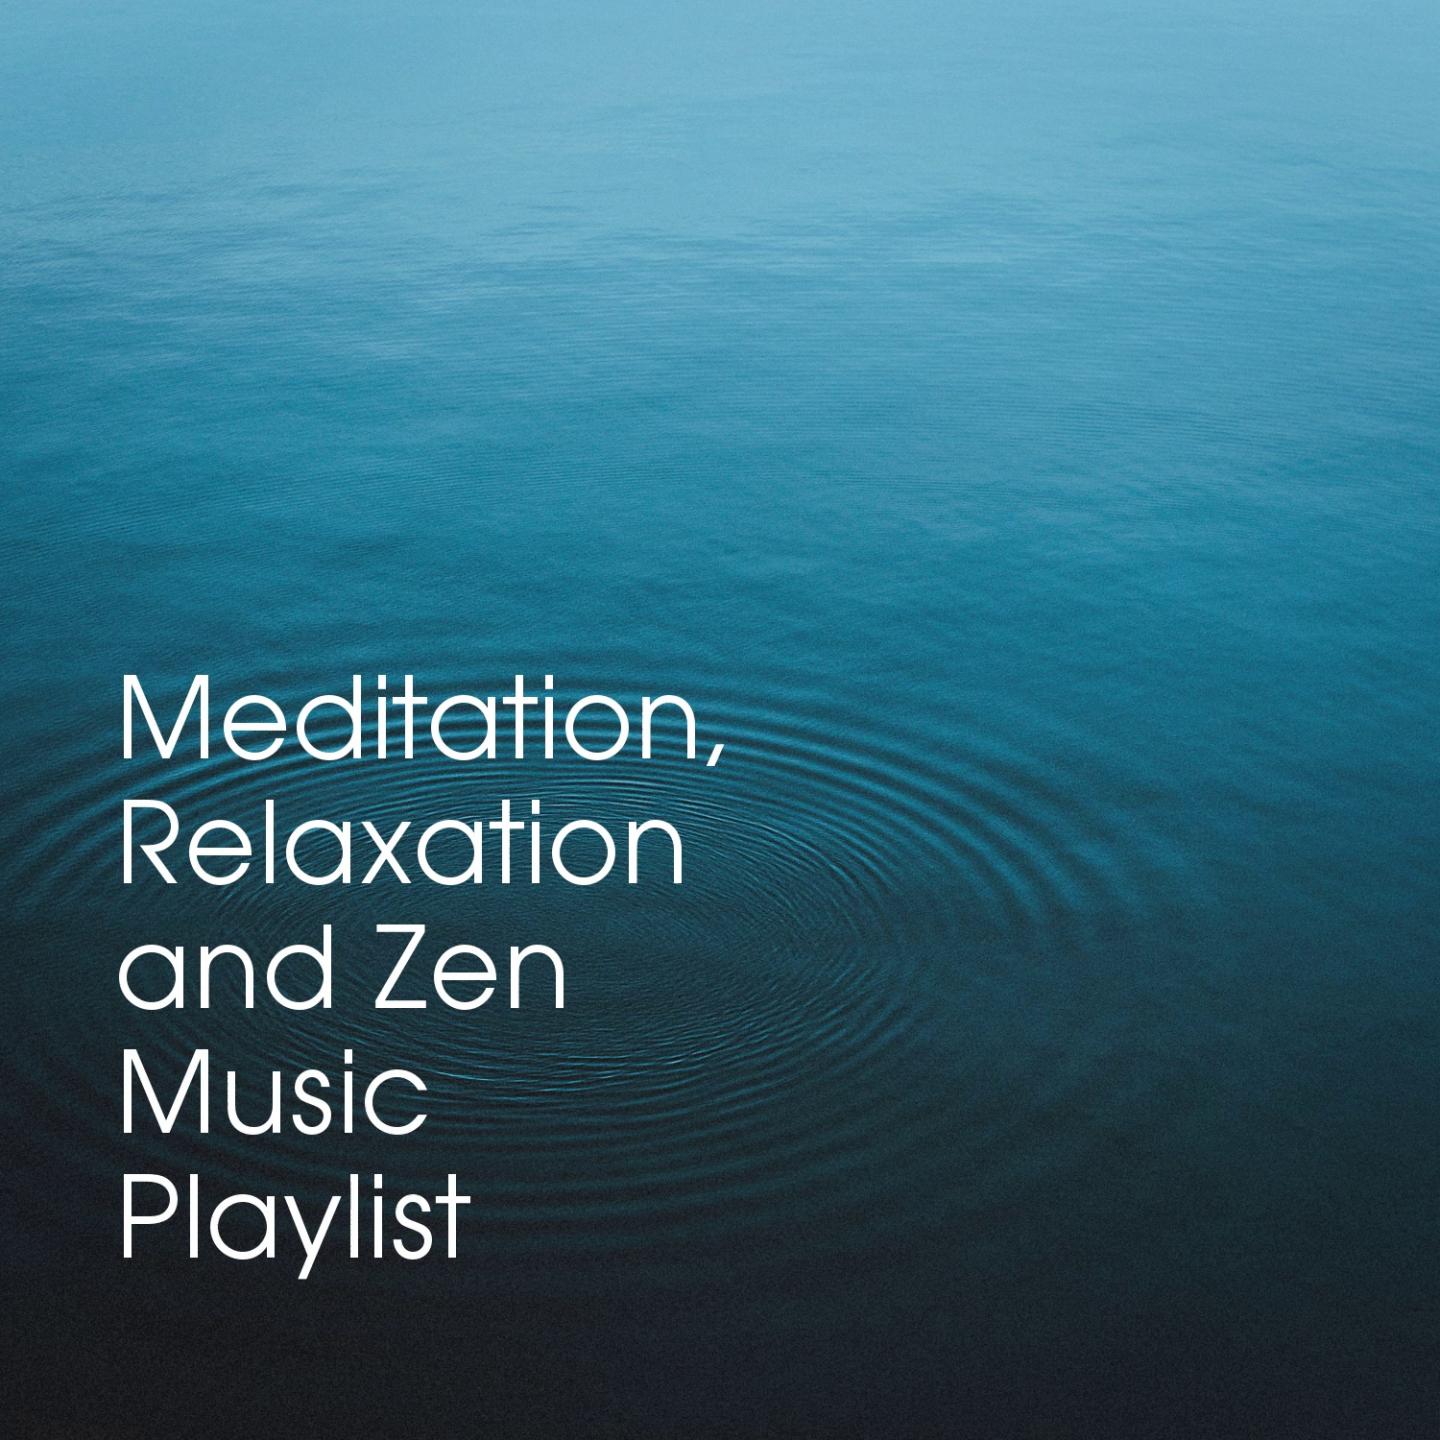 Meditation, Relaxation and Zen Music Playlist